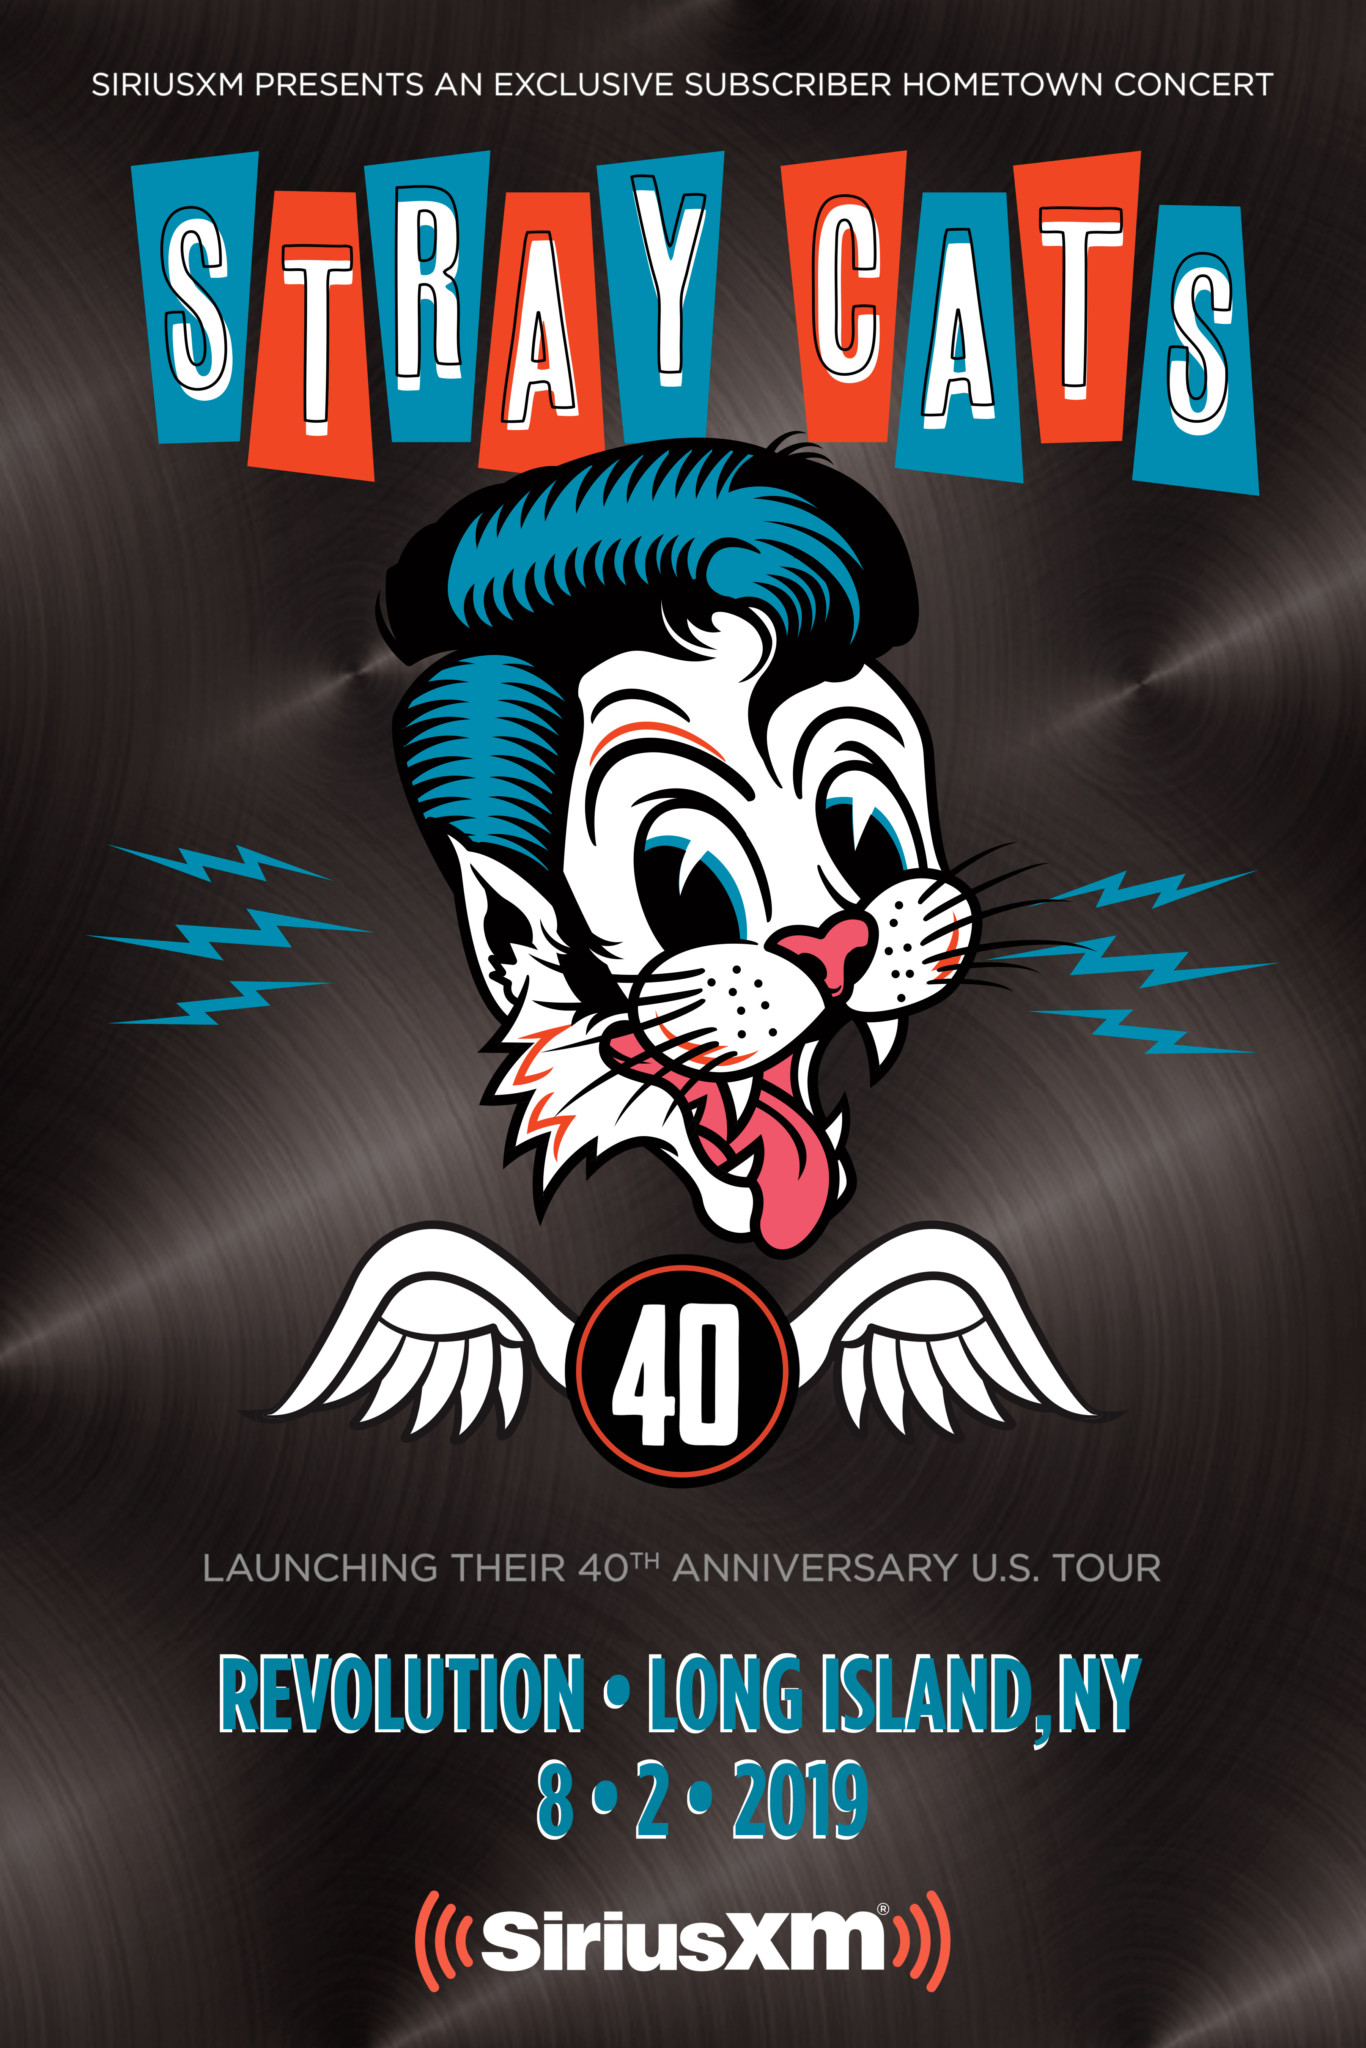 SIRIUSXM PRESENTS A HOMETOWN CONCERT WITH THE STRAY CATS ON AUGUST 2nd